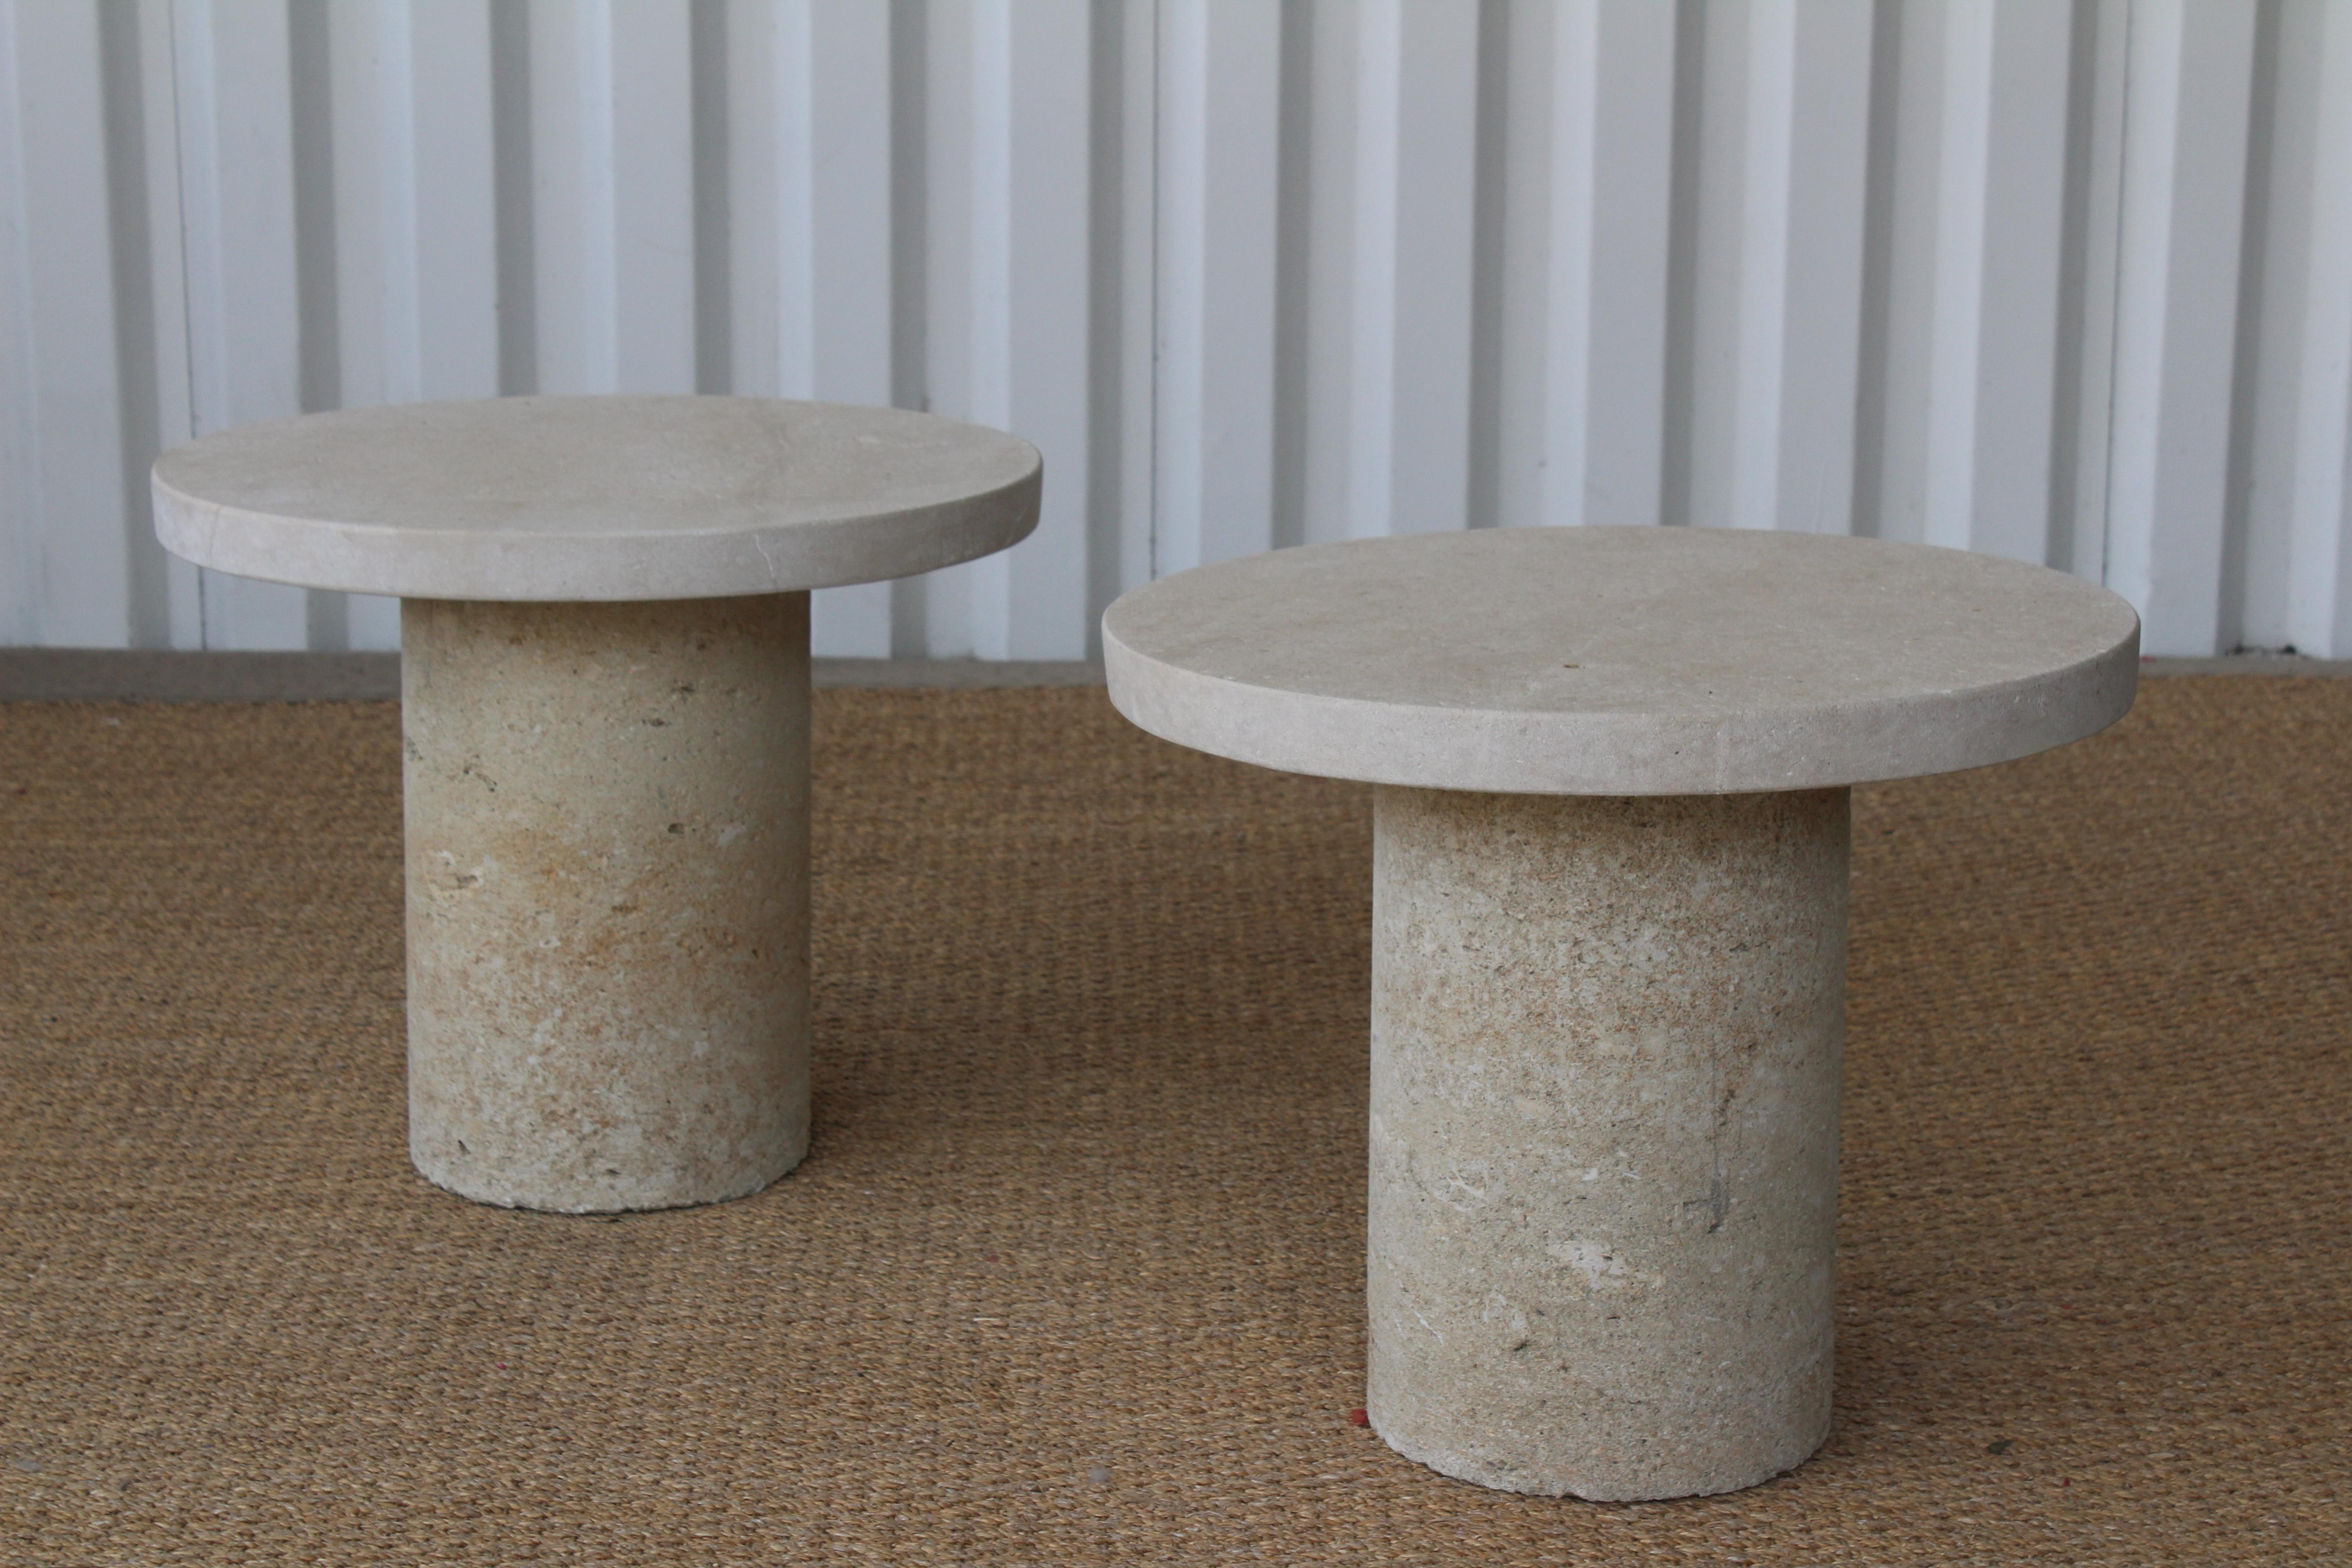 Pair of 1960s Italian travertine solid stone side tables. Suitable for indoor or outdoor use. Pair available, each sold individually. The tops sit on the bases freely and can be removed for easier transportation. In over all good condition with most